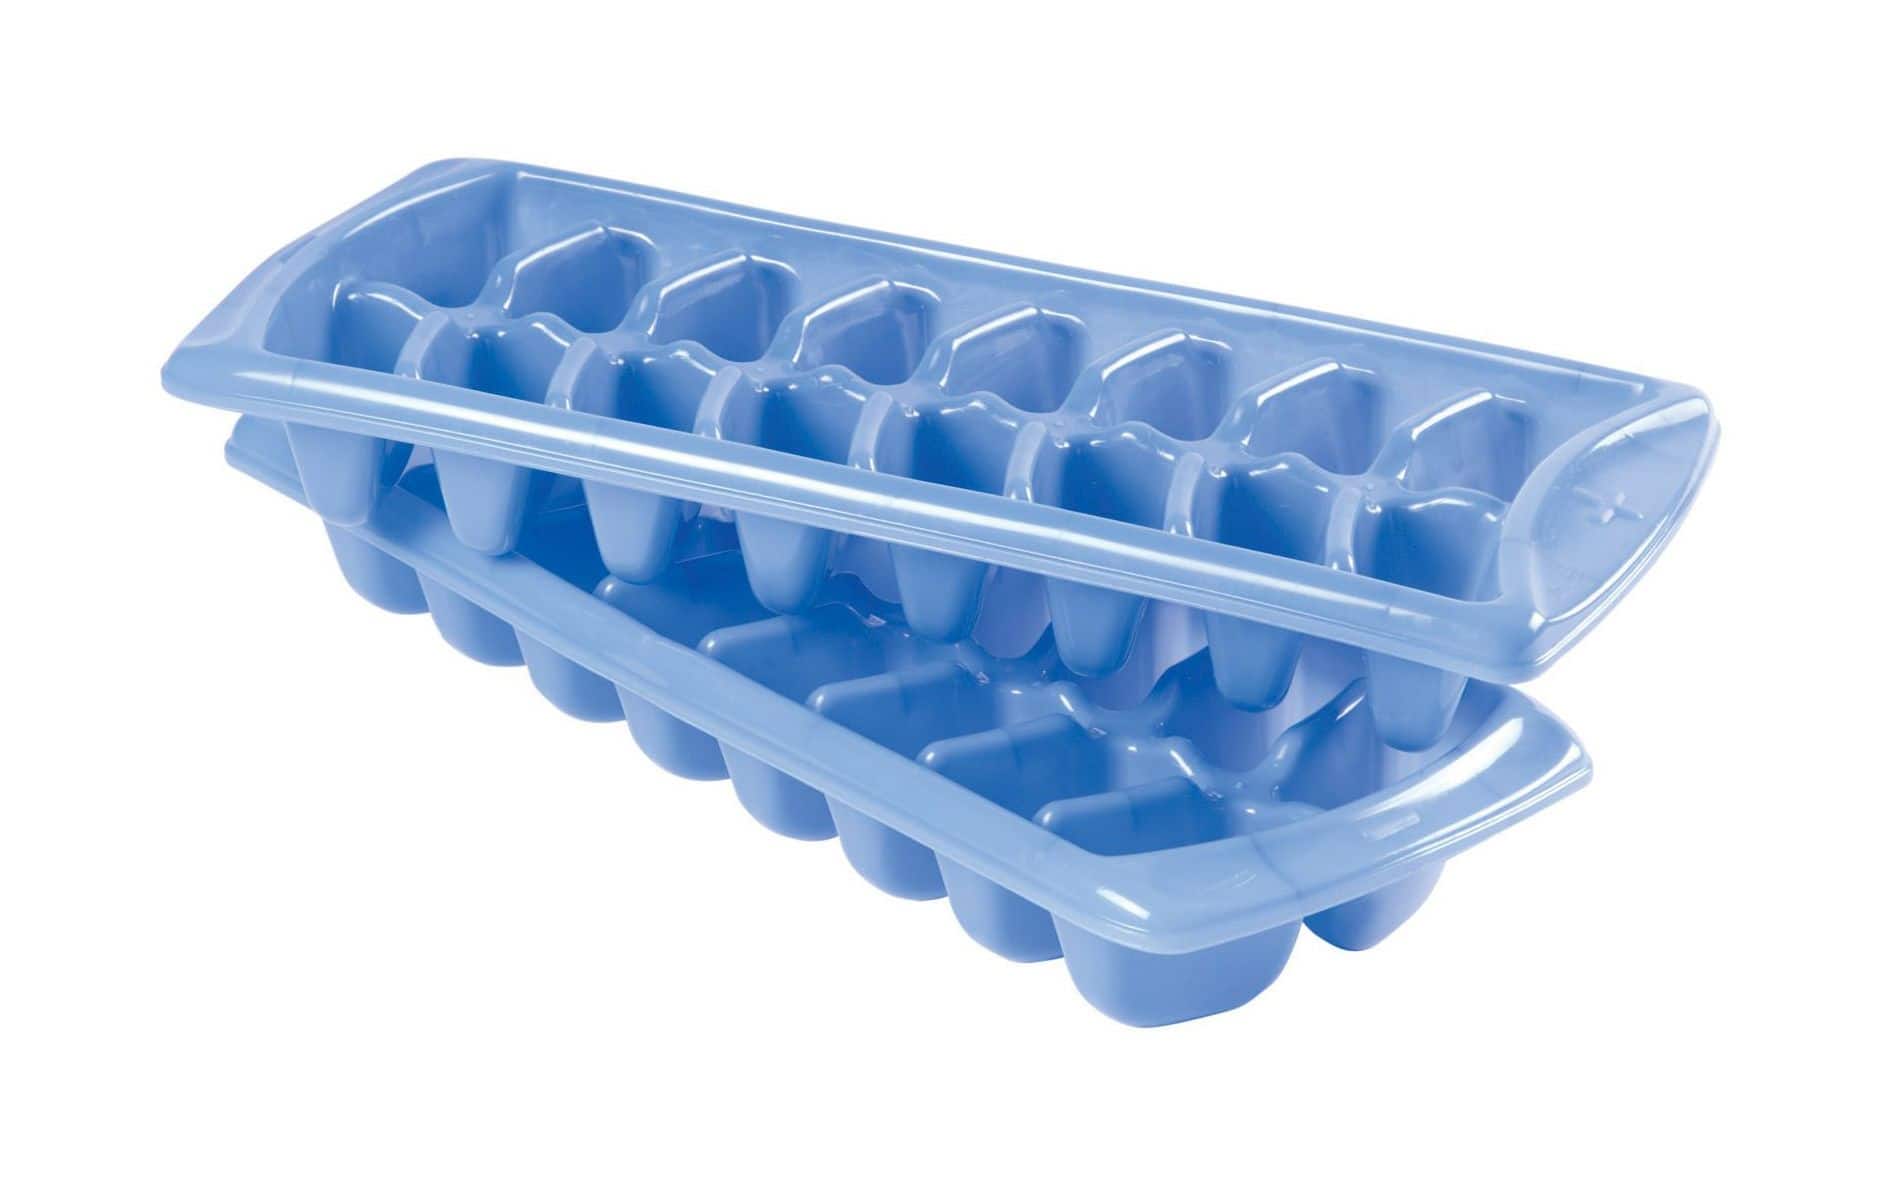 https://media-www.canadiantire.ca/product/living/kitchen/food-storage/0422022/rubbermaid-ice-cube-tray-2pack-6ebd31ef-96de-47b5-9c6f-822859cb2e8a-jpgrendition.jpg